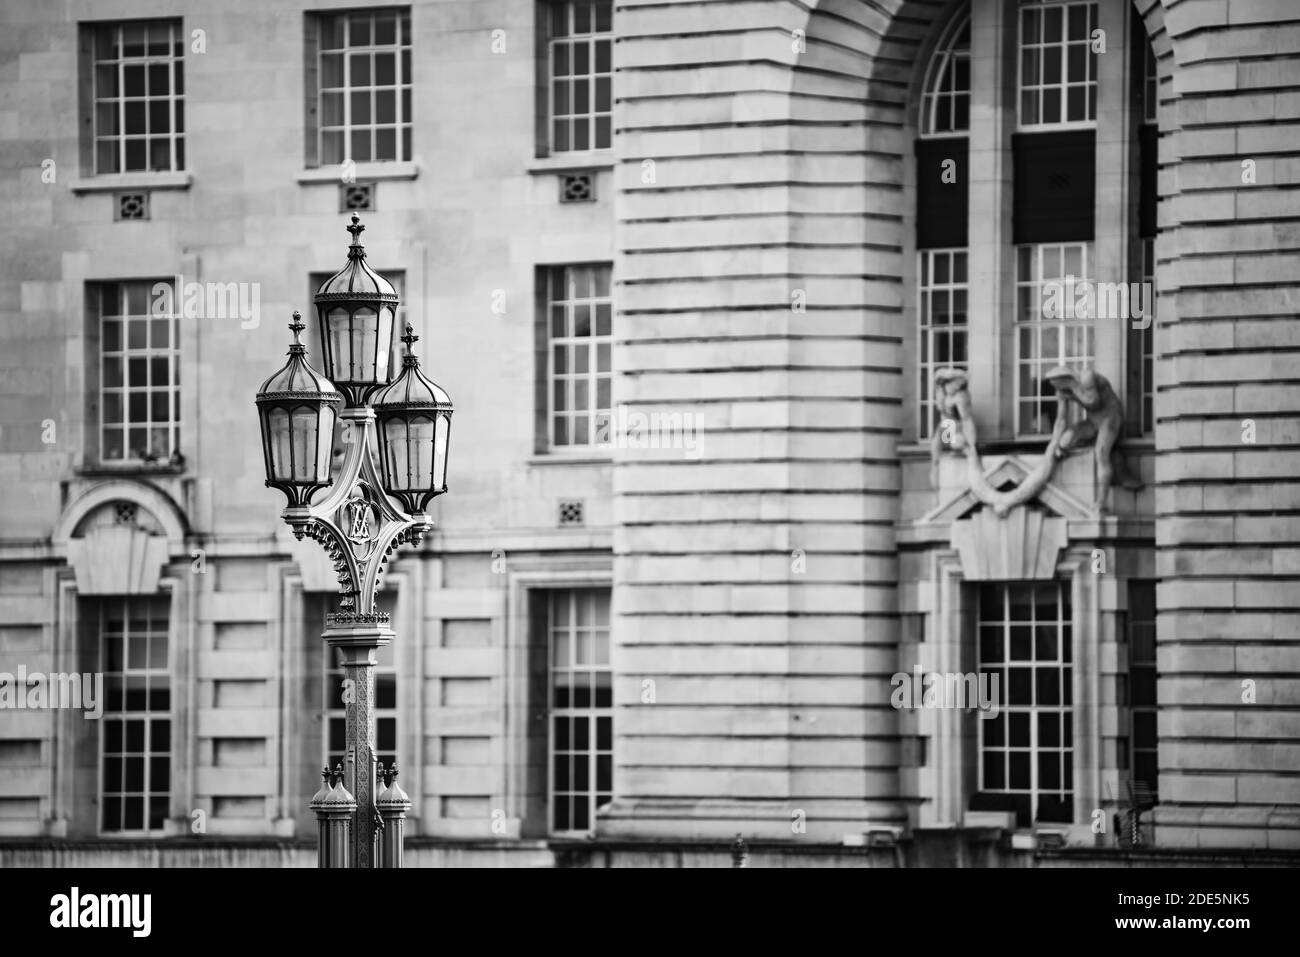 Black and white lamp posts on Westminster Bridge with London architecture behind, cityscape of buildings and historic old lamps showing architecturla details of England, UK, Europe Stock Photo